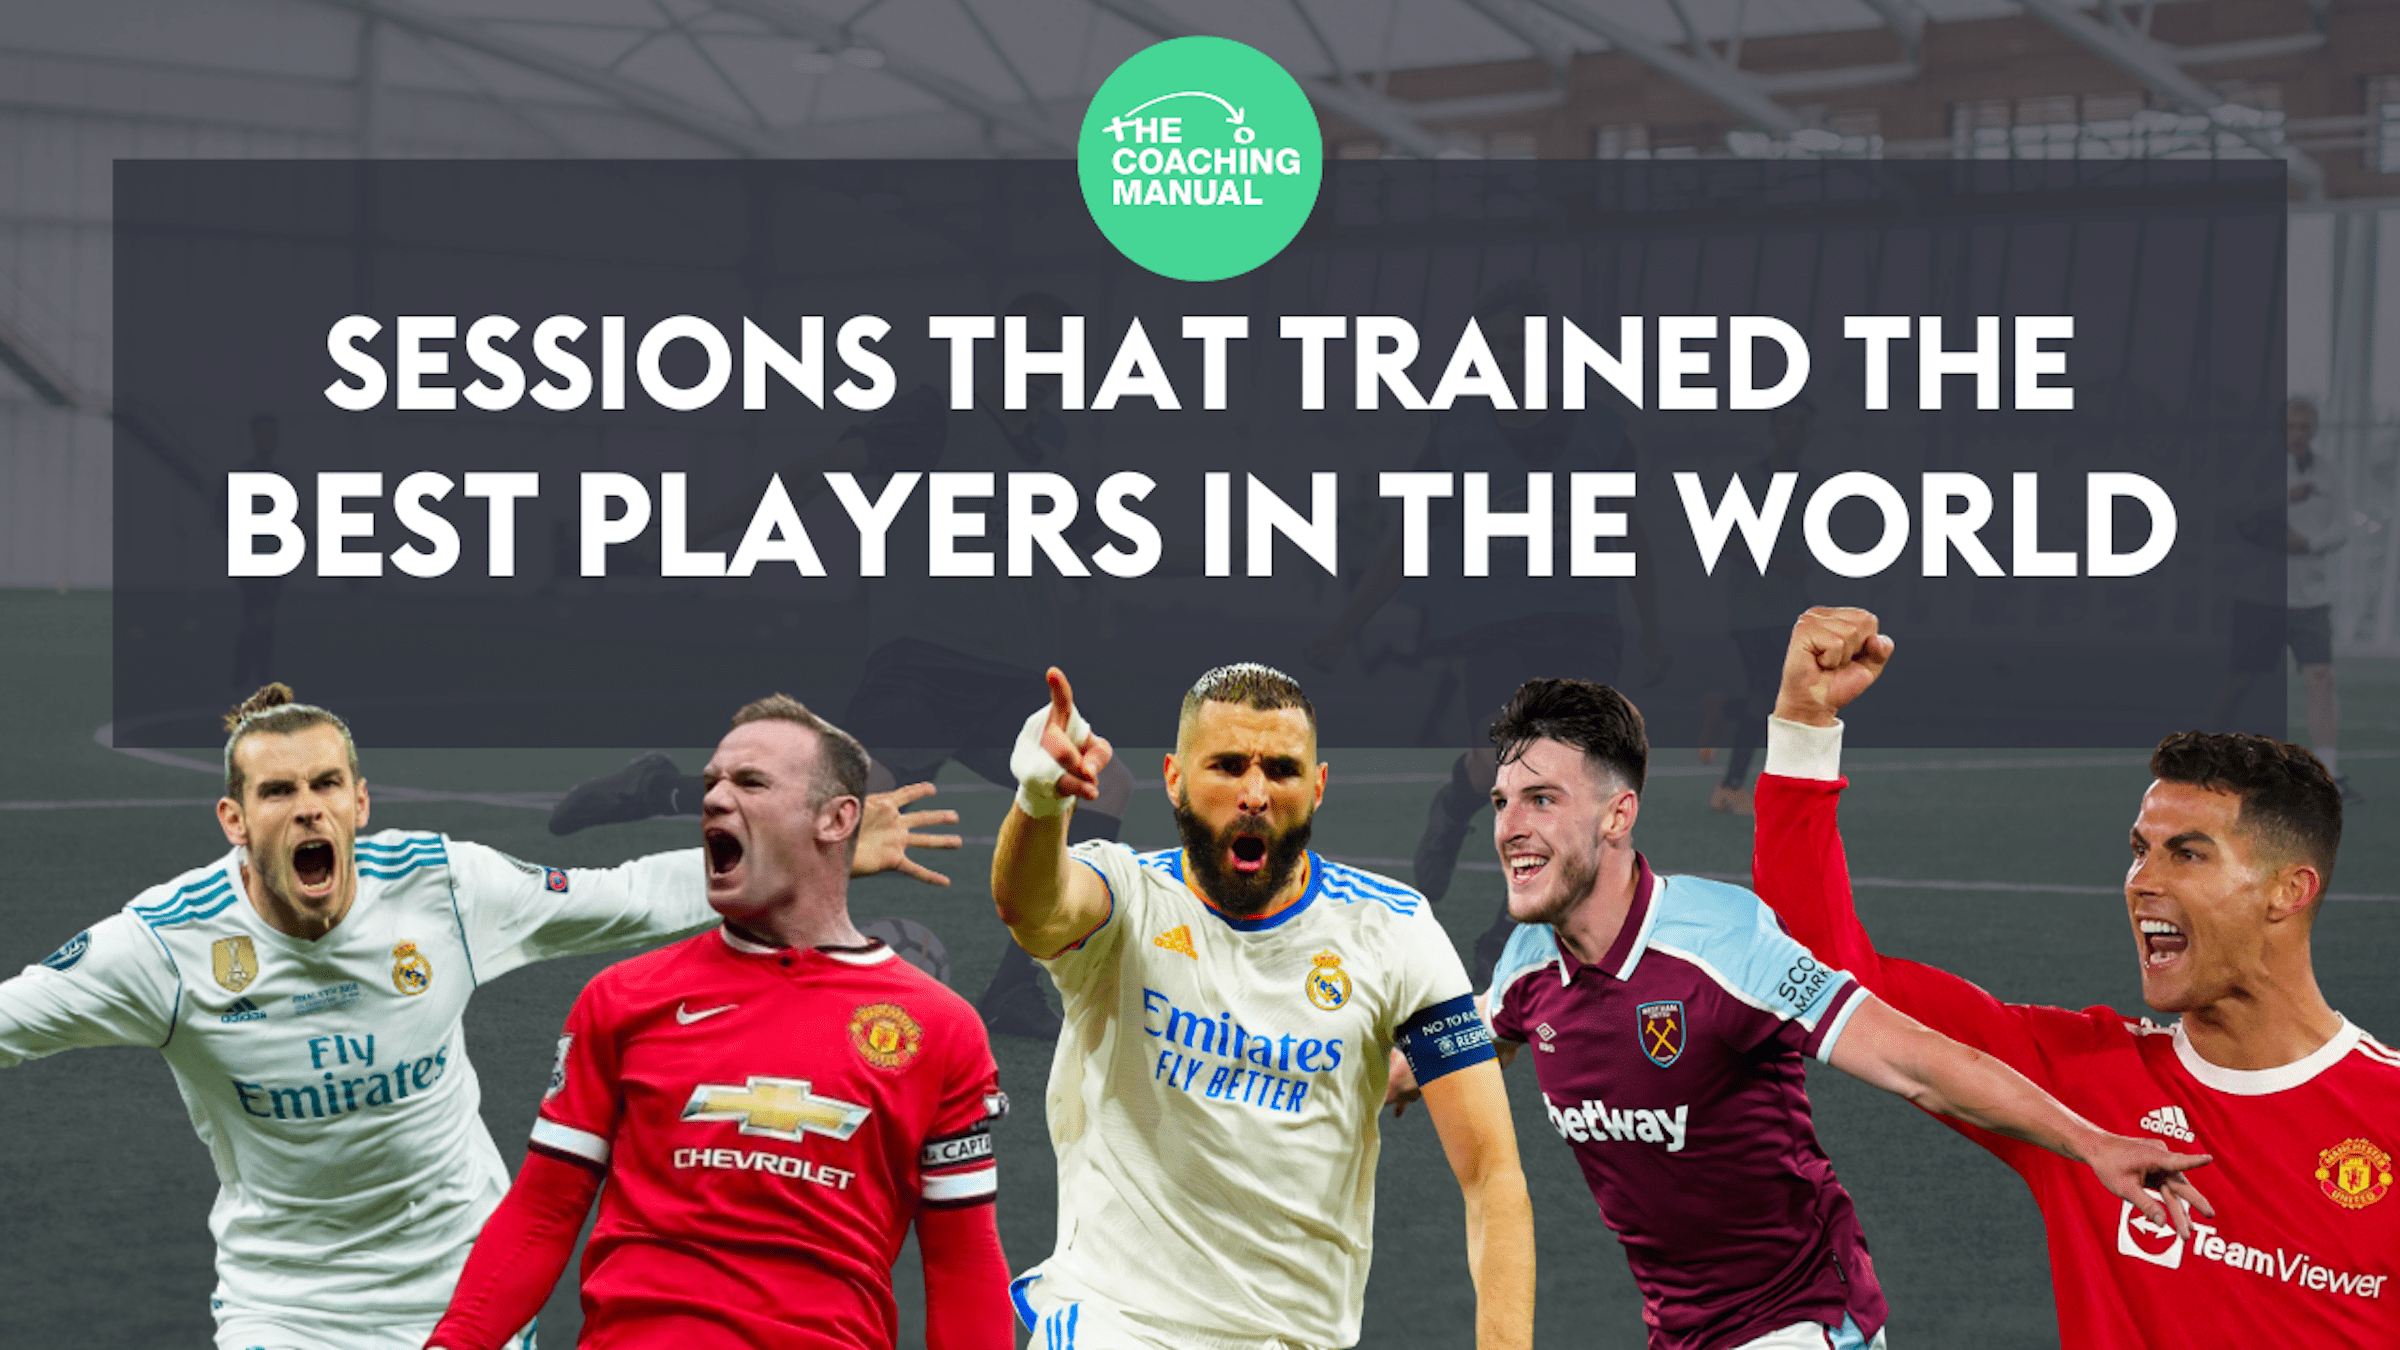 Sessions that have trained the best players in the world